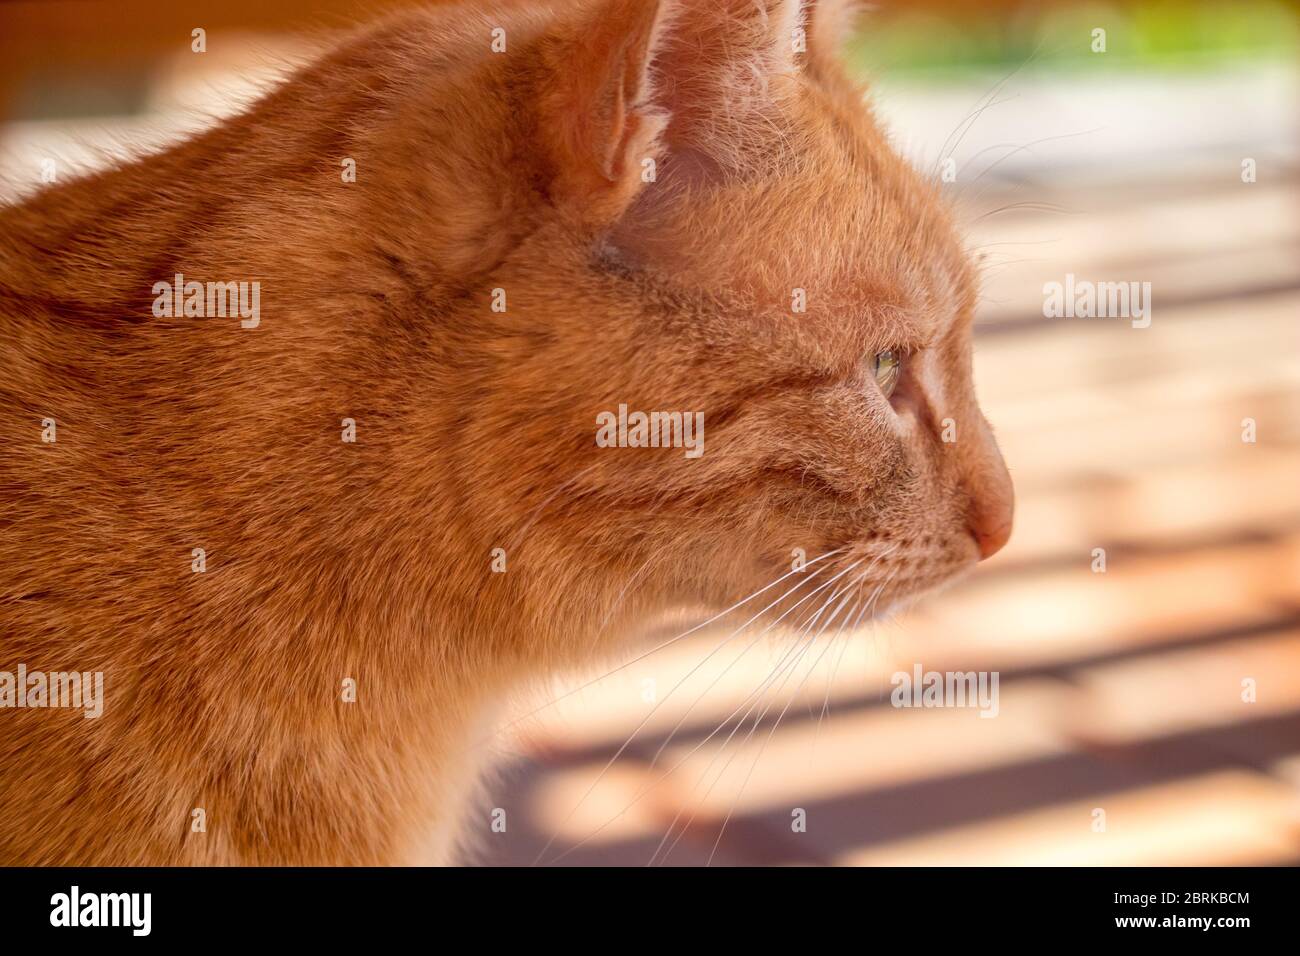 red cat - close up view of the head of a ginger cat, outdoors in the garden Stock Photo